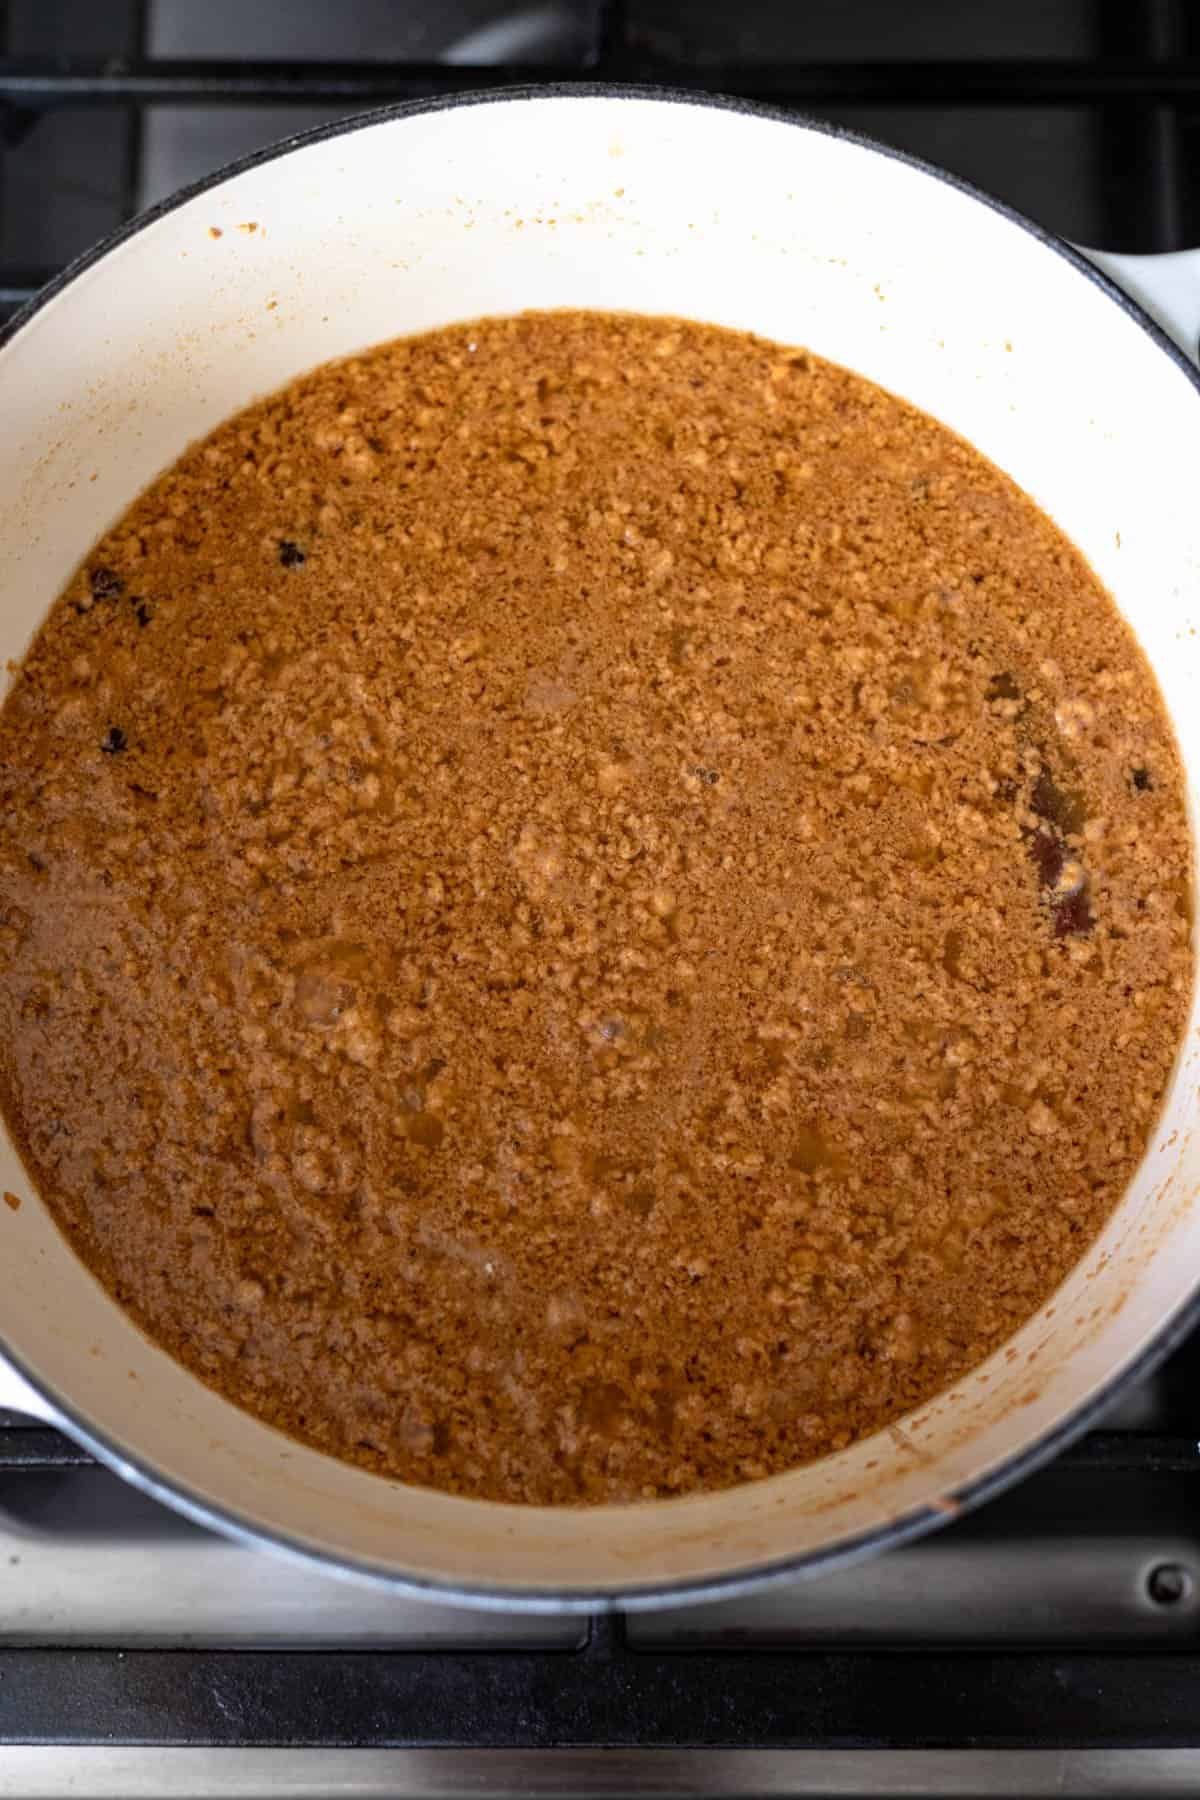 curdled milk combined with melted sugar in a pot that has turned darker in color